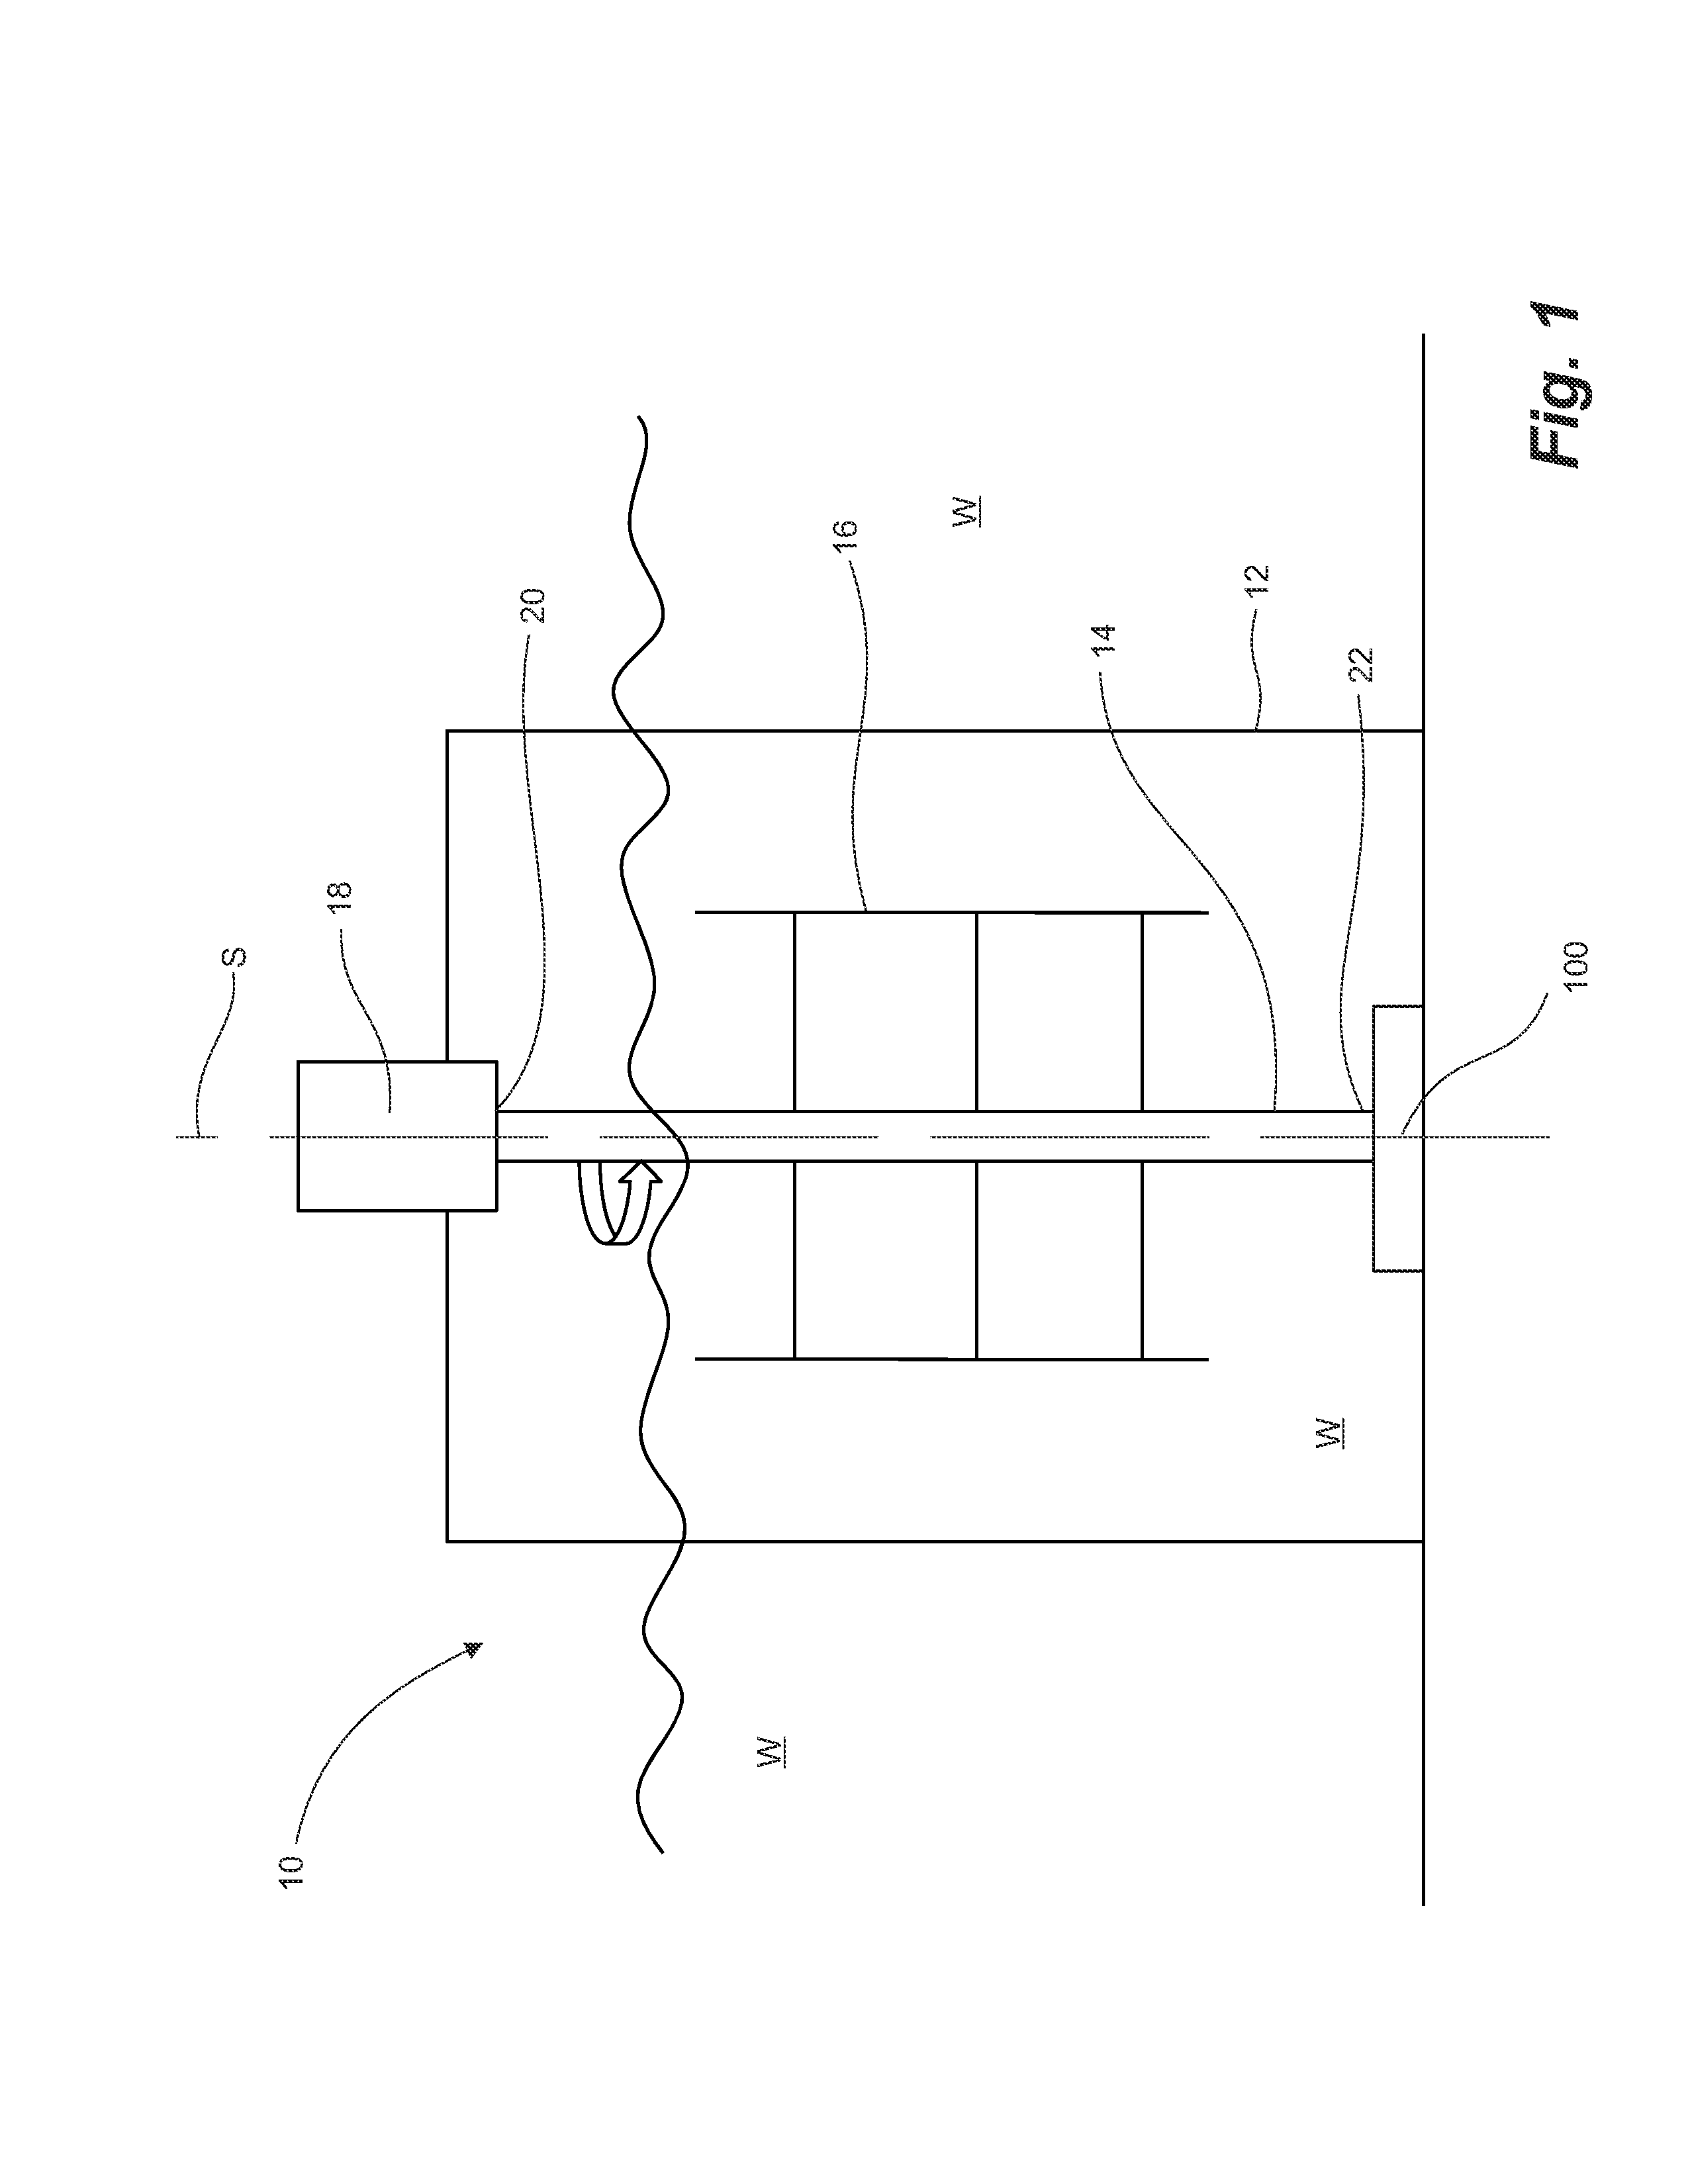 Pdc bearing for use in a fluid environment